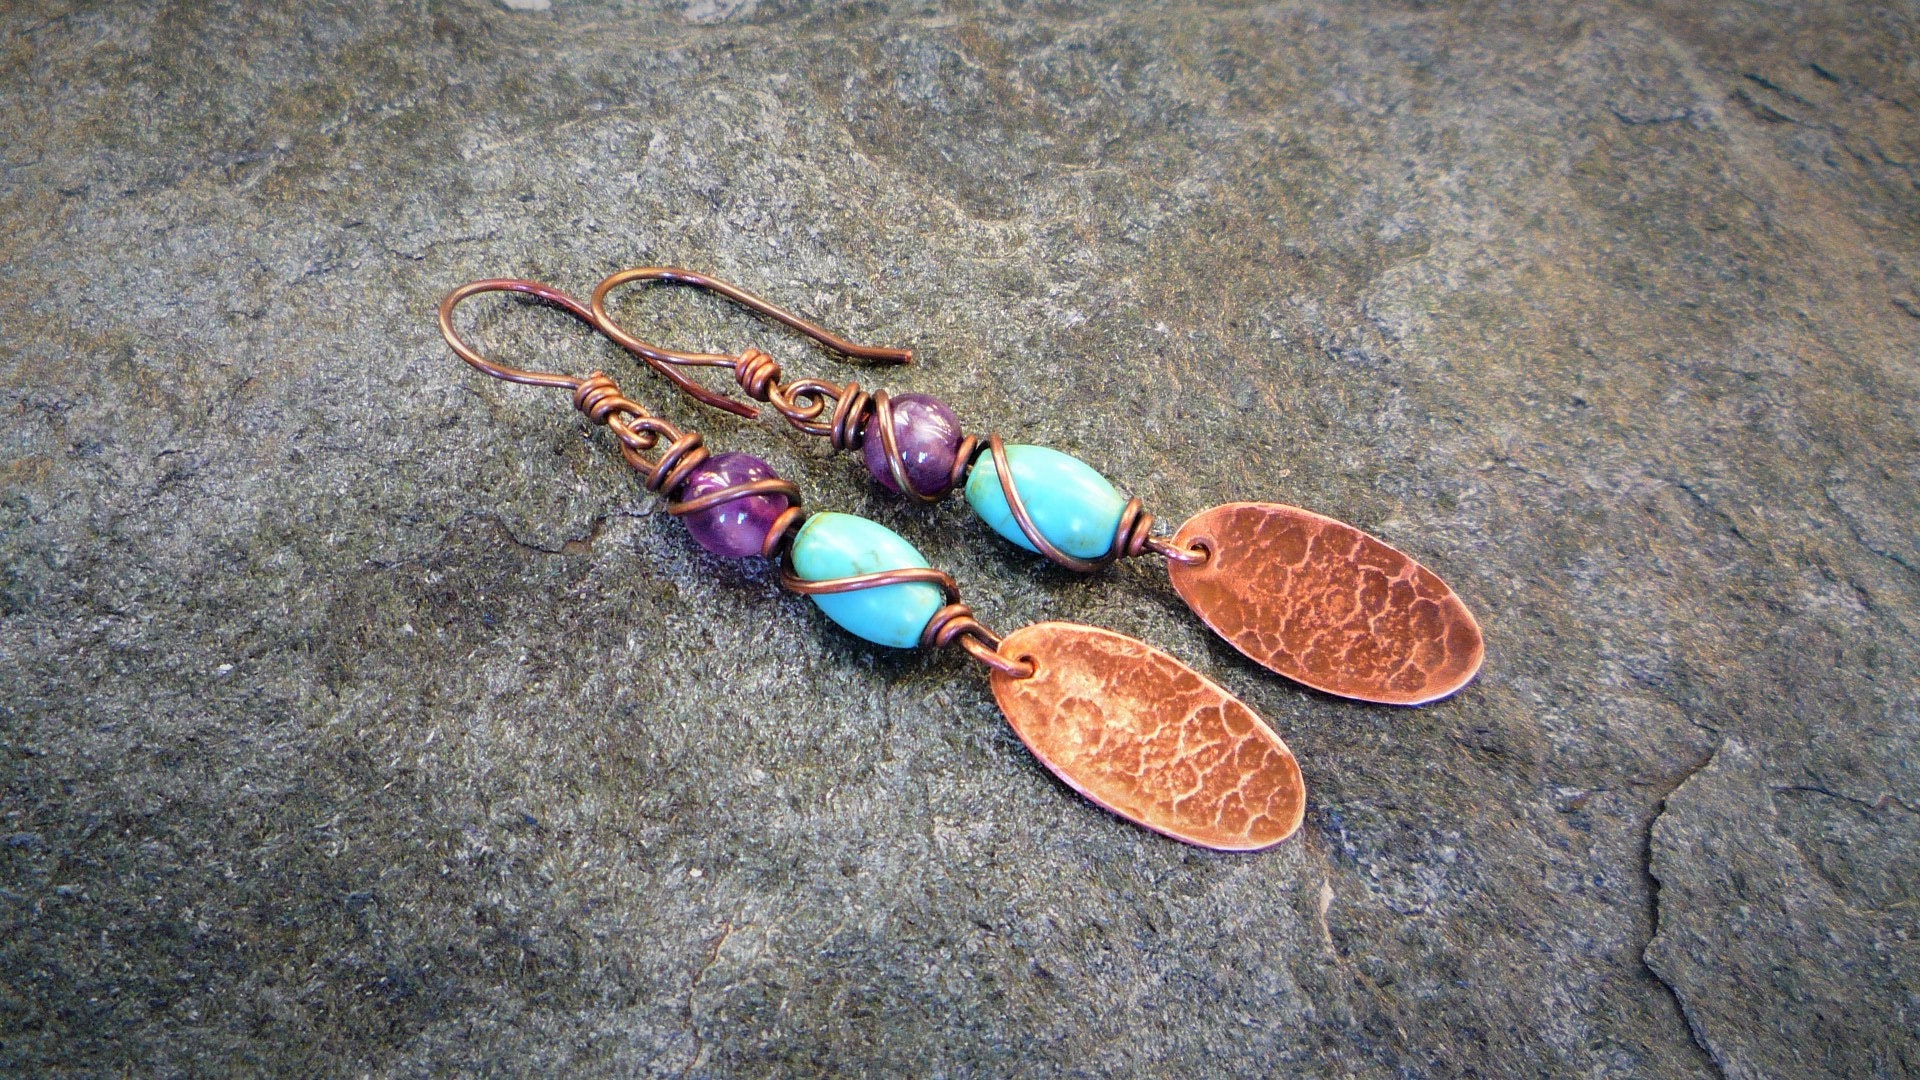 Turquoise and Amethyst earrings Copper jewelry Artisan | Etsy